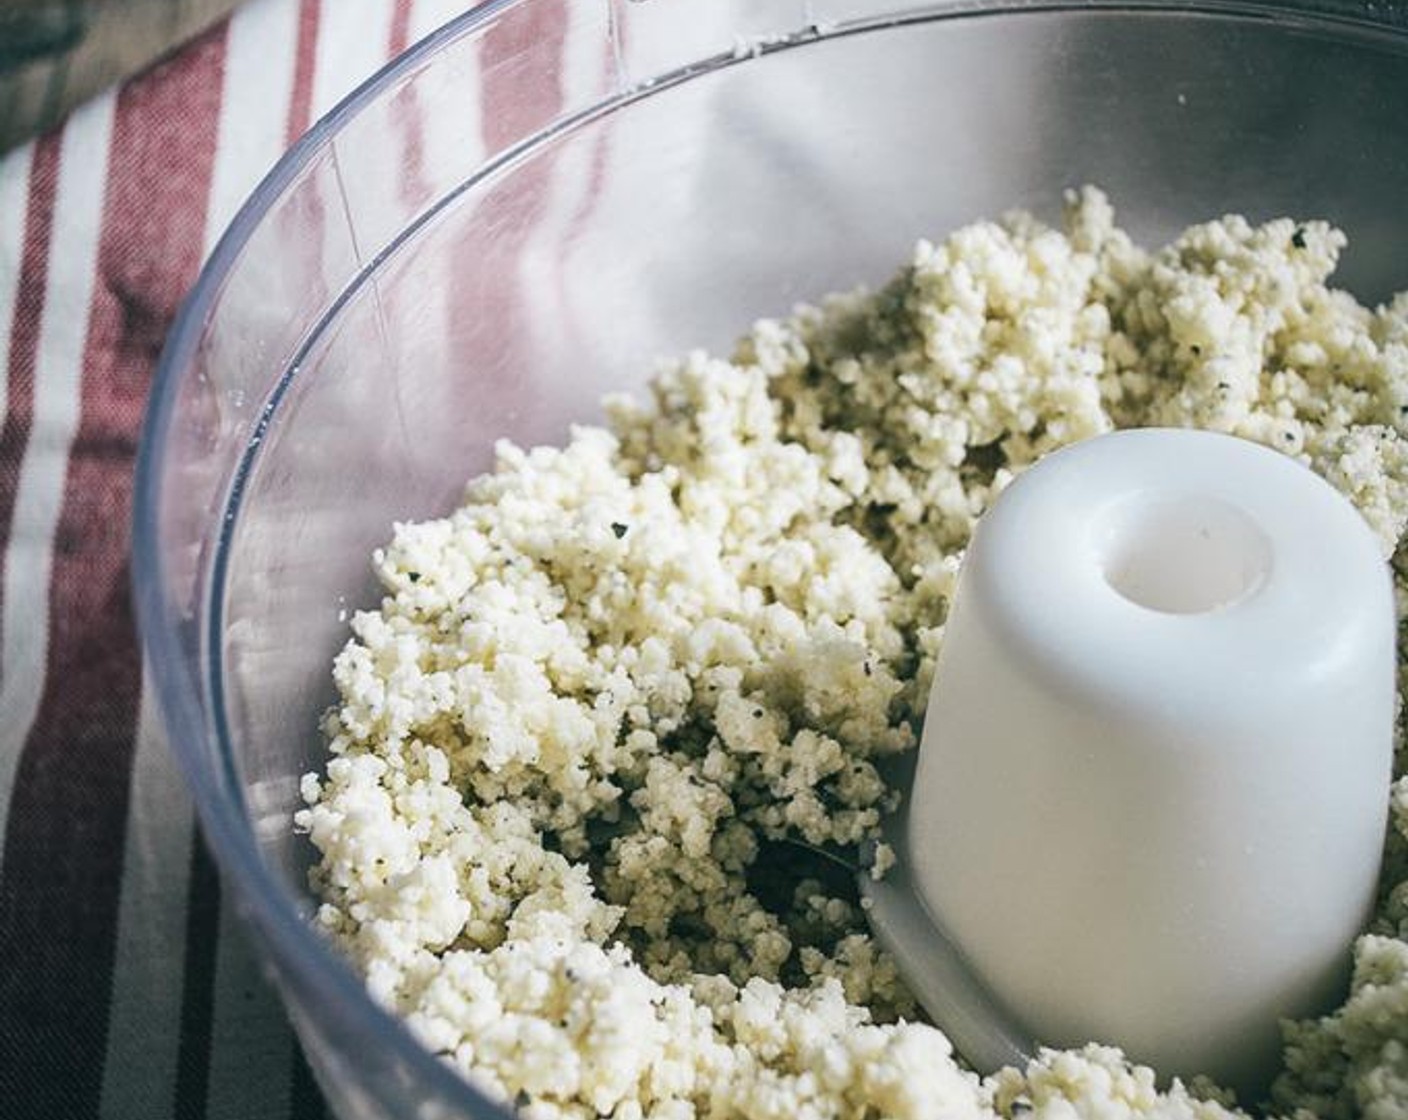 step 2 While the oven heats, add Gluten-Free All-Purpose Flour (1 cup), Coconut Flour (1/4 cup), Sea Salt (1/2 tsp), Dried Basil (1 tsp), Garlic Powder (1/4 tsp), and Onion Powder (1/4 tsp) to bowl of food processor. Pulse 4-5 quick pulses to blend ingredients.